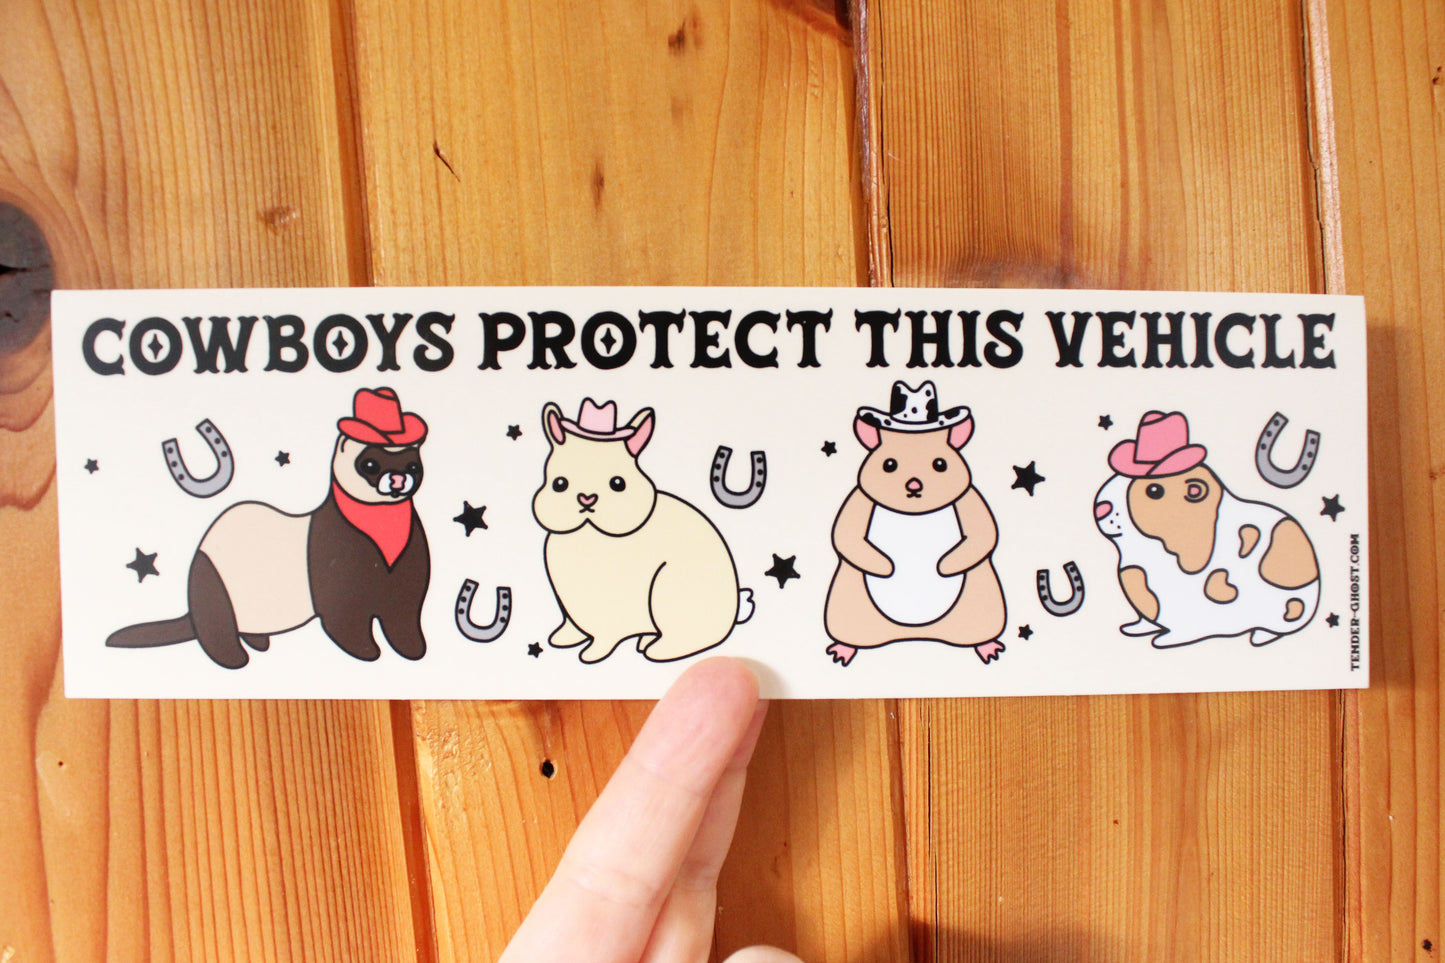 Cowboys Protect This Vehicle Bumper Sticker